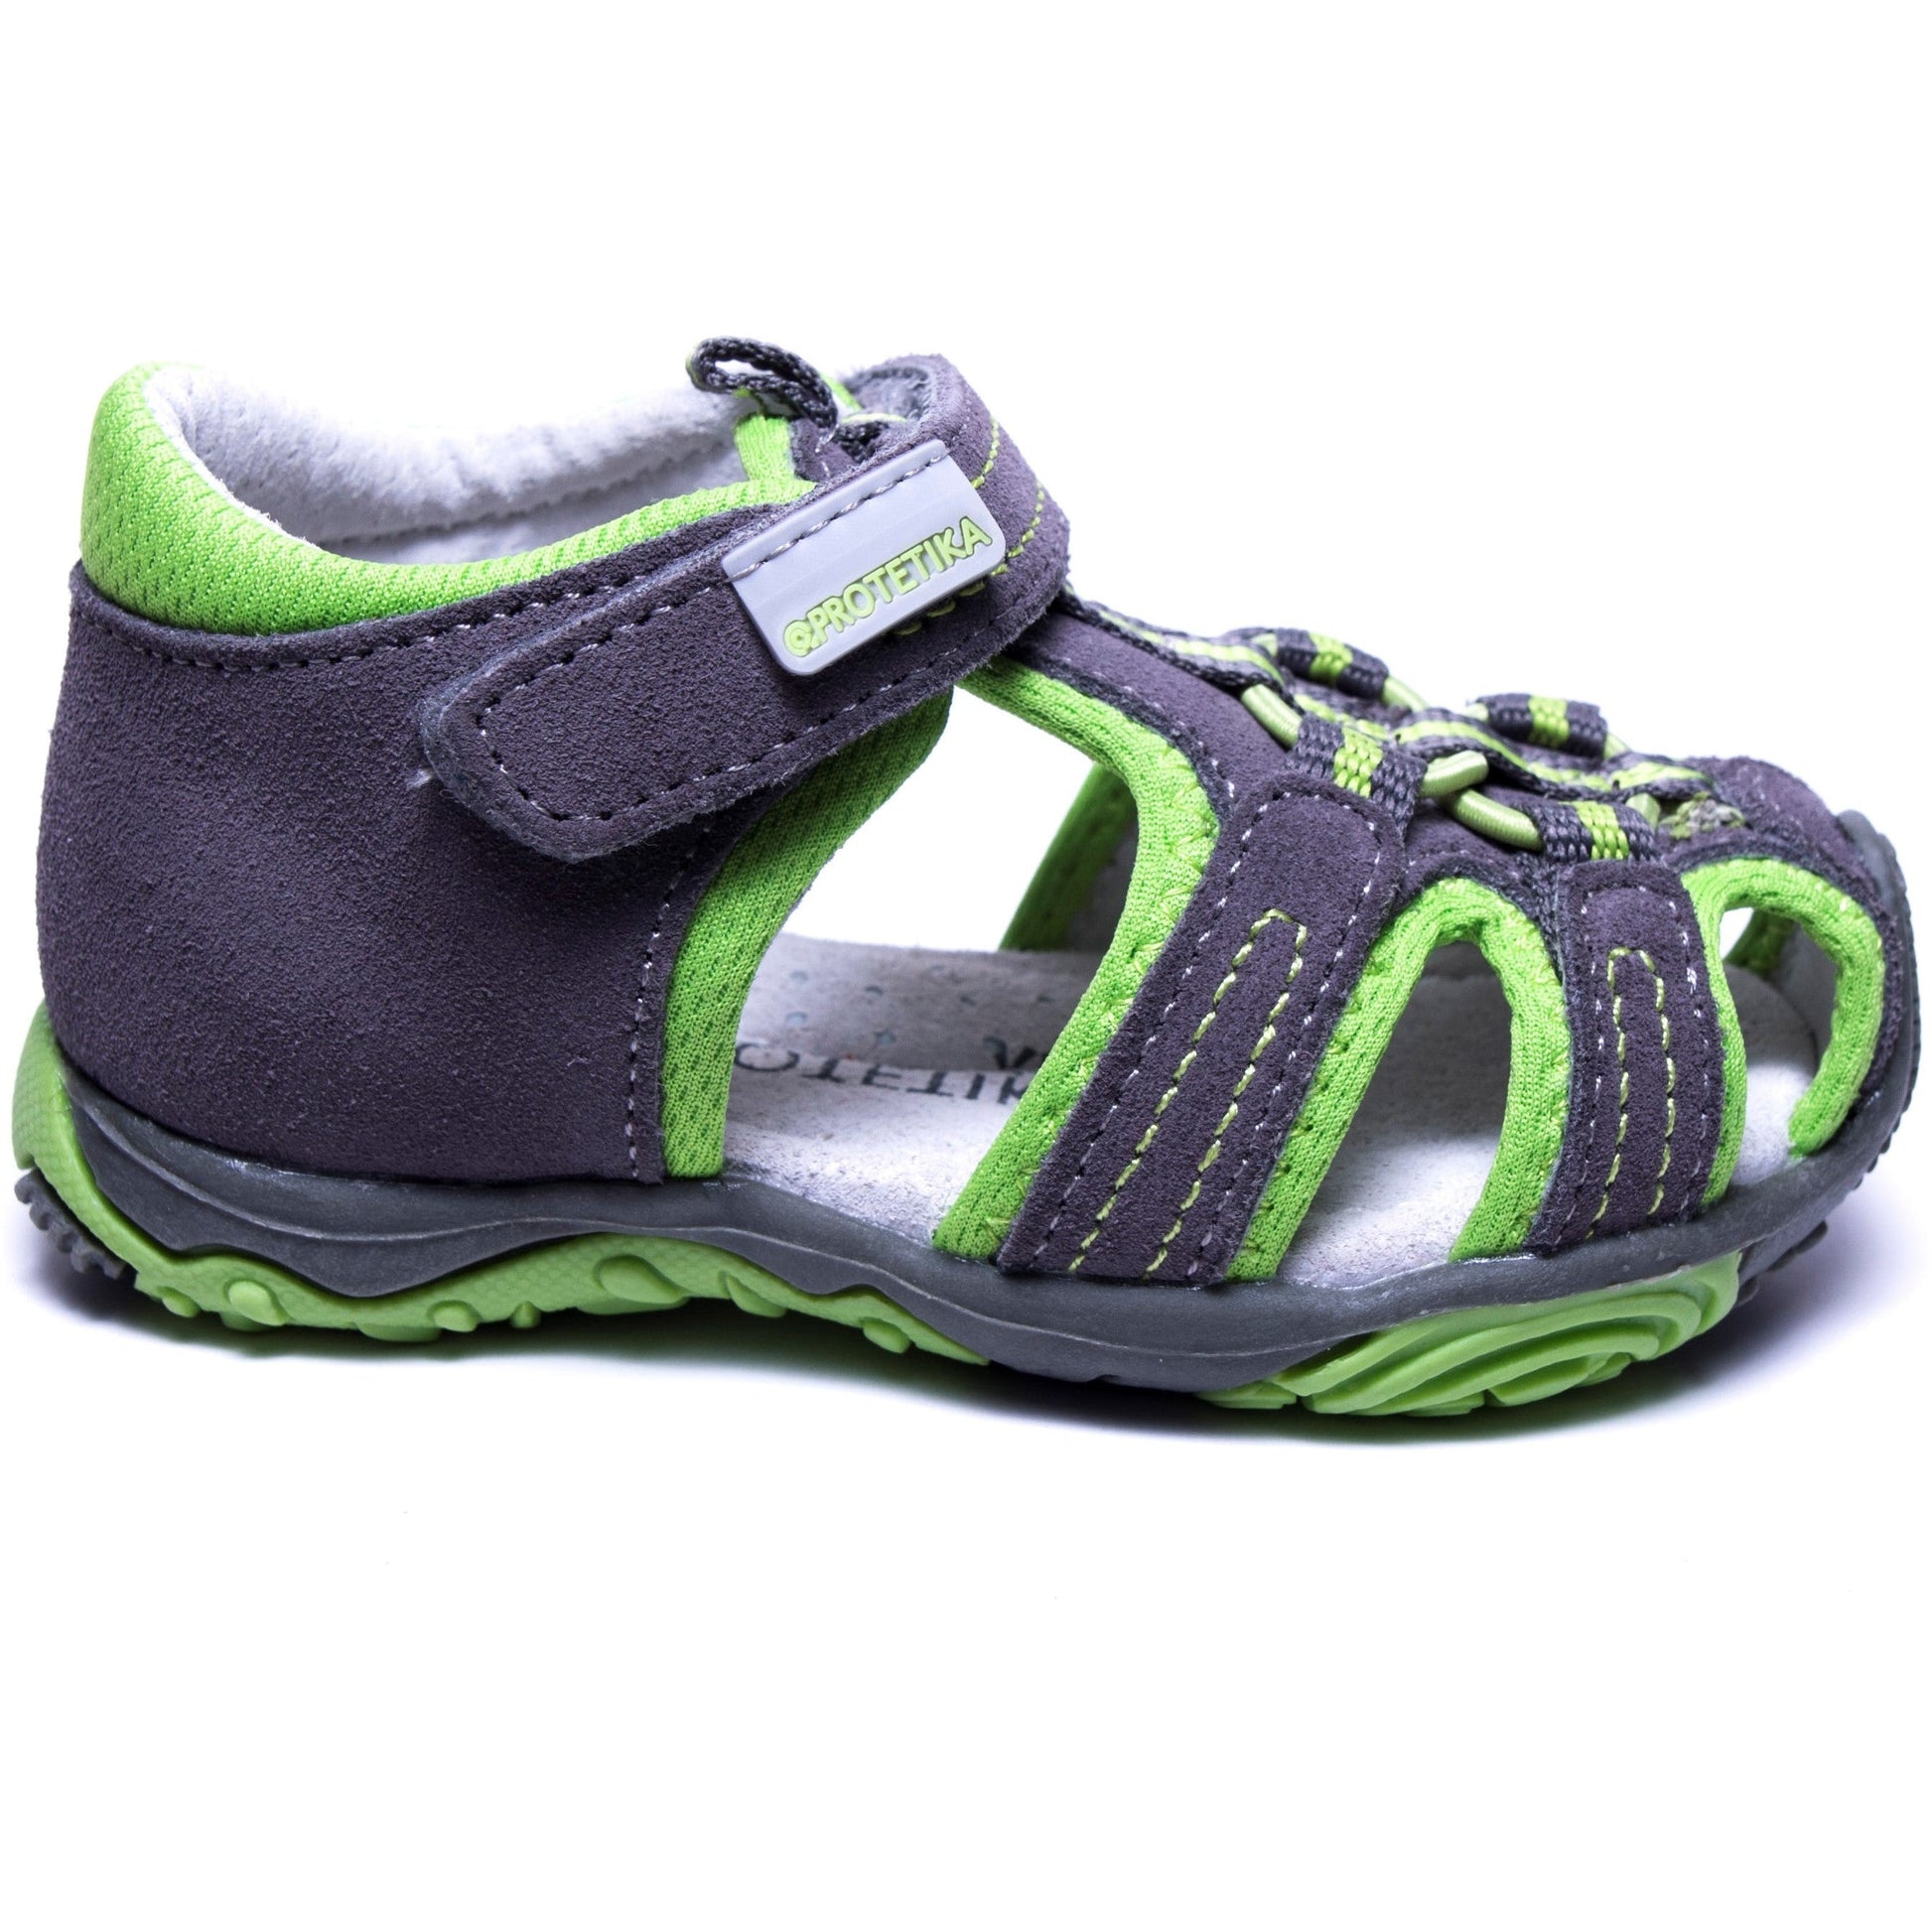 These toddler boys sandals have an appealing grey green colour combination. They are comfortable and pleasant to wear because of the leather inside and a mild arch support and a closed heel.